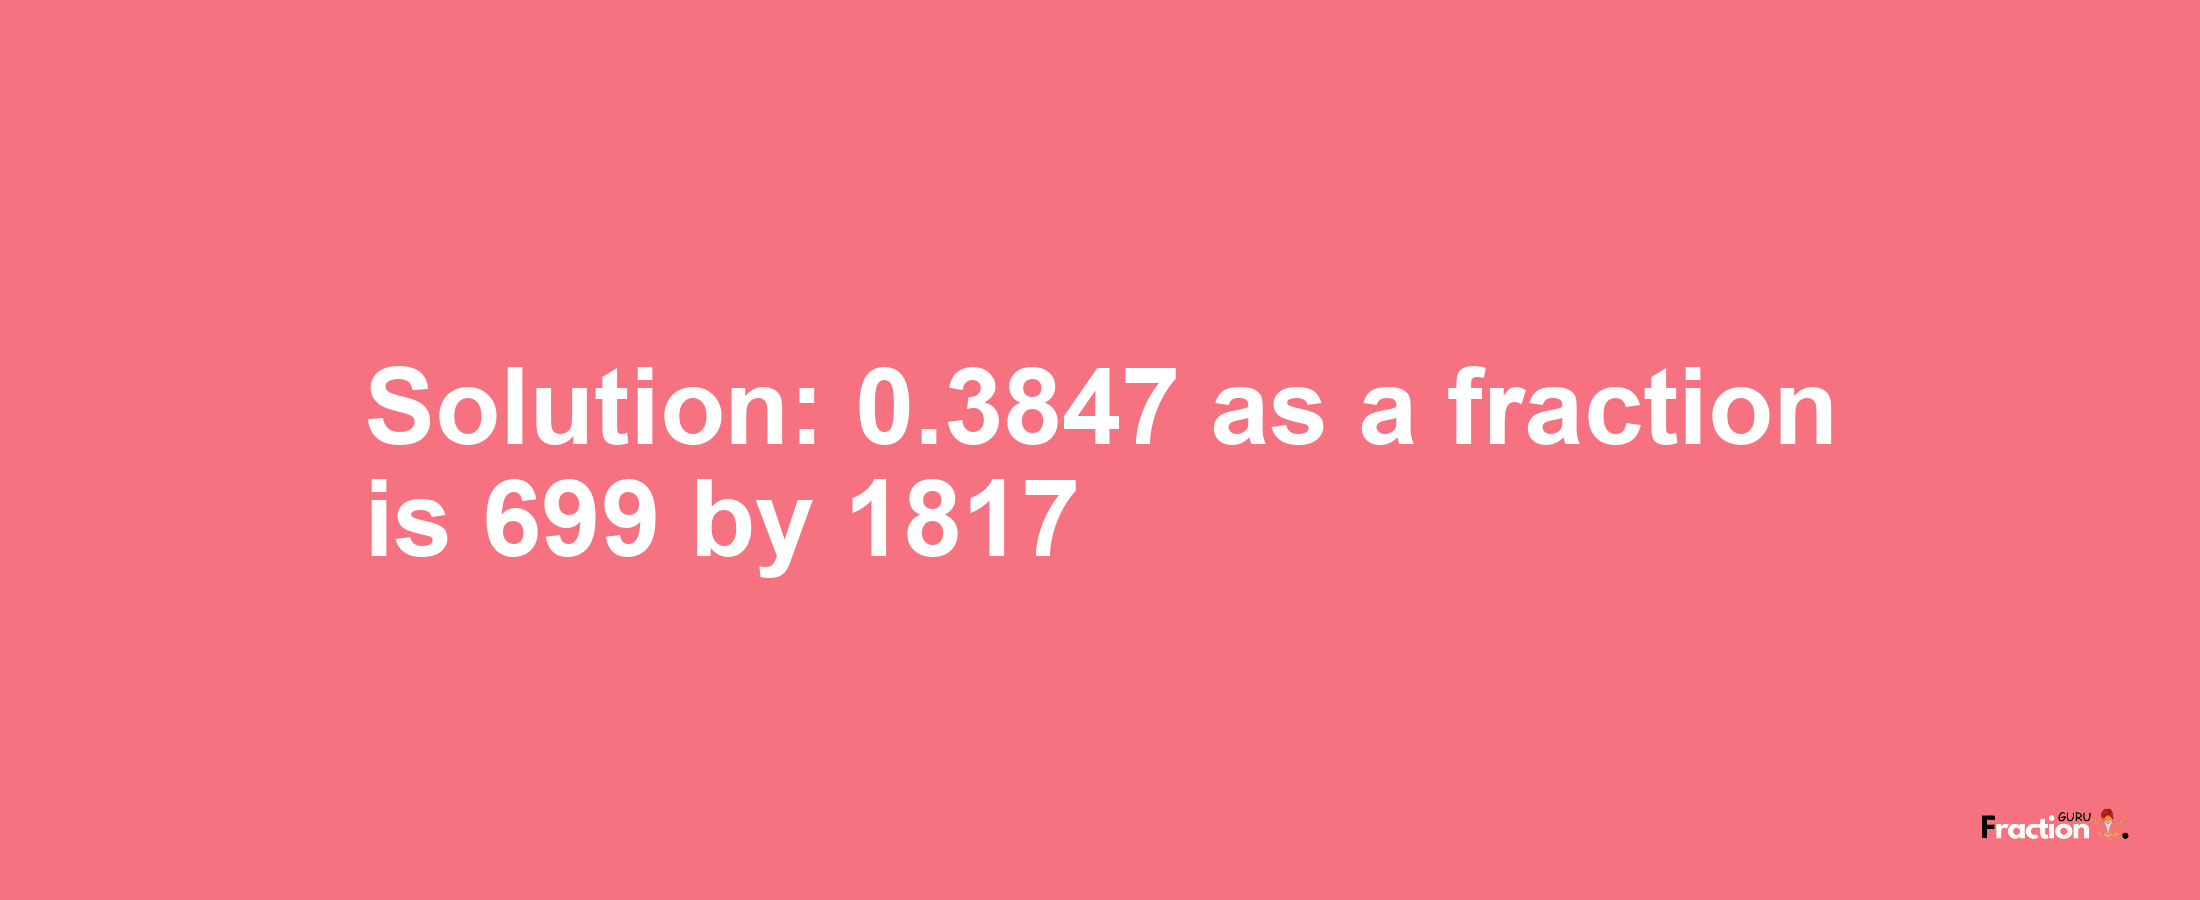 Solution:0.3847 as a fraction is 699/1817